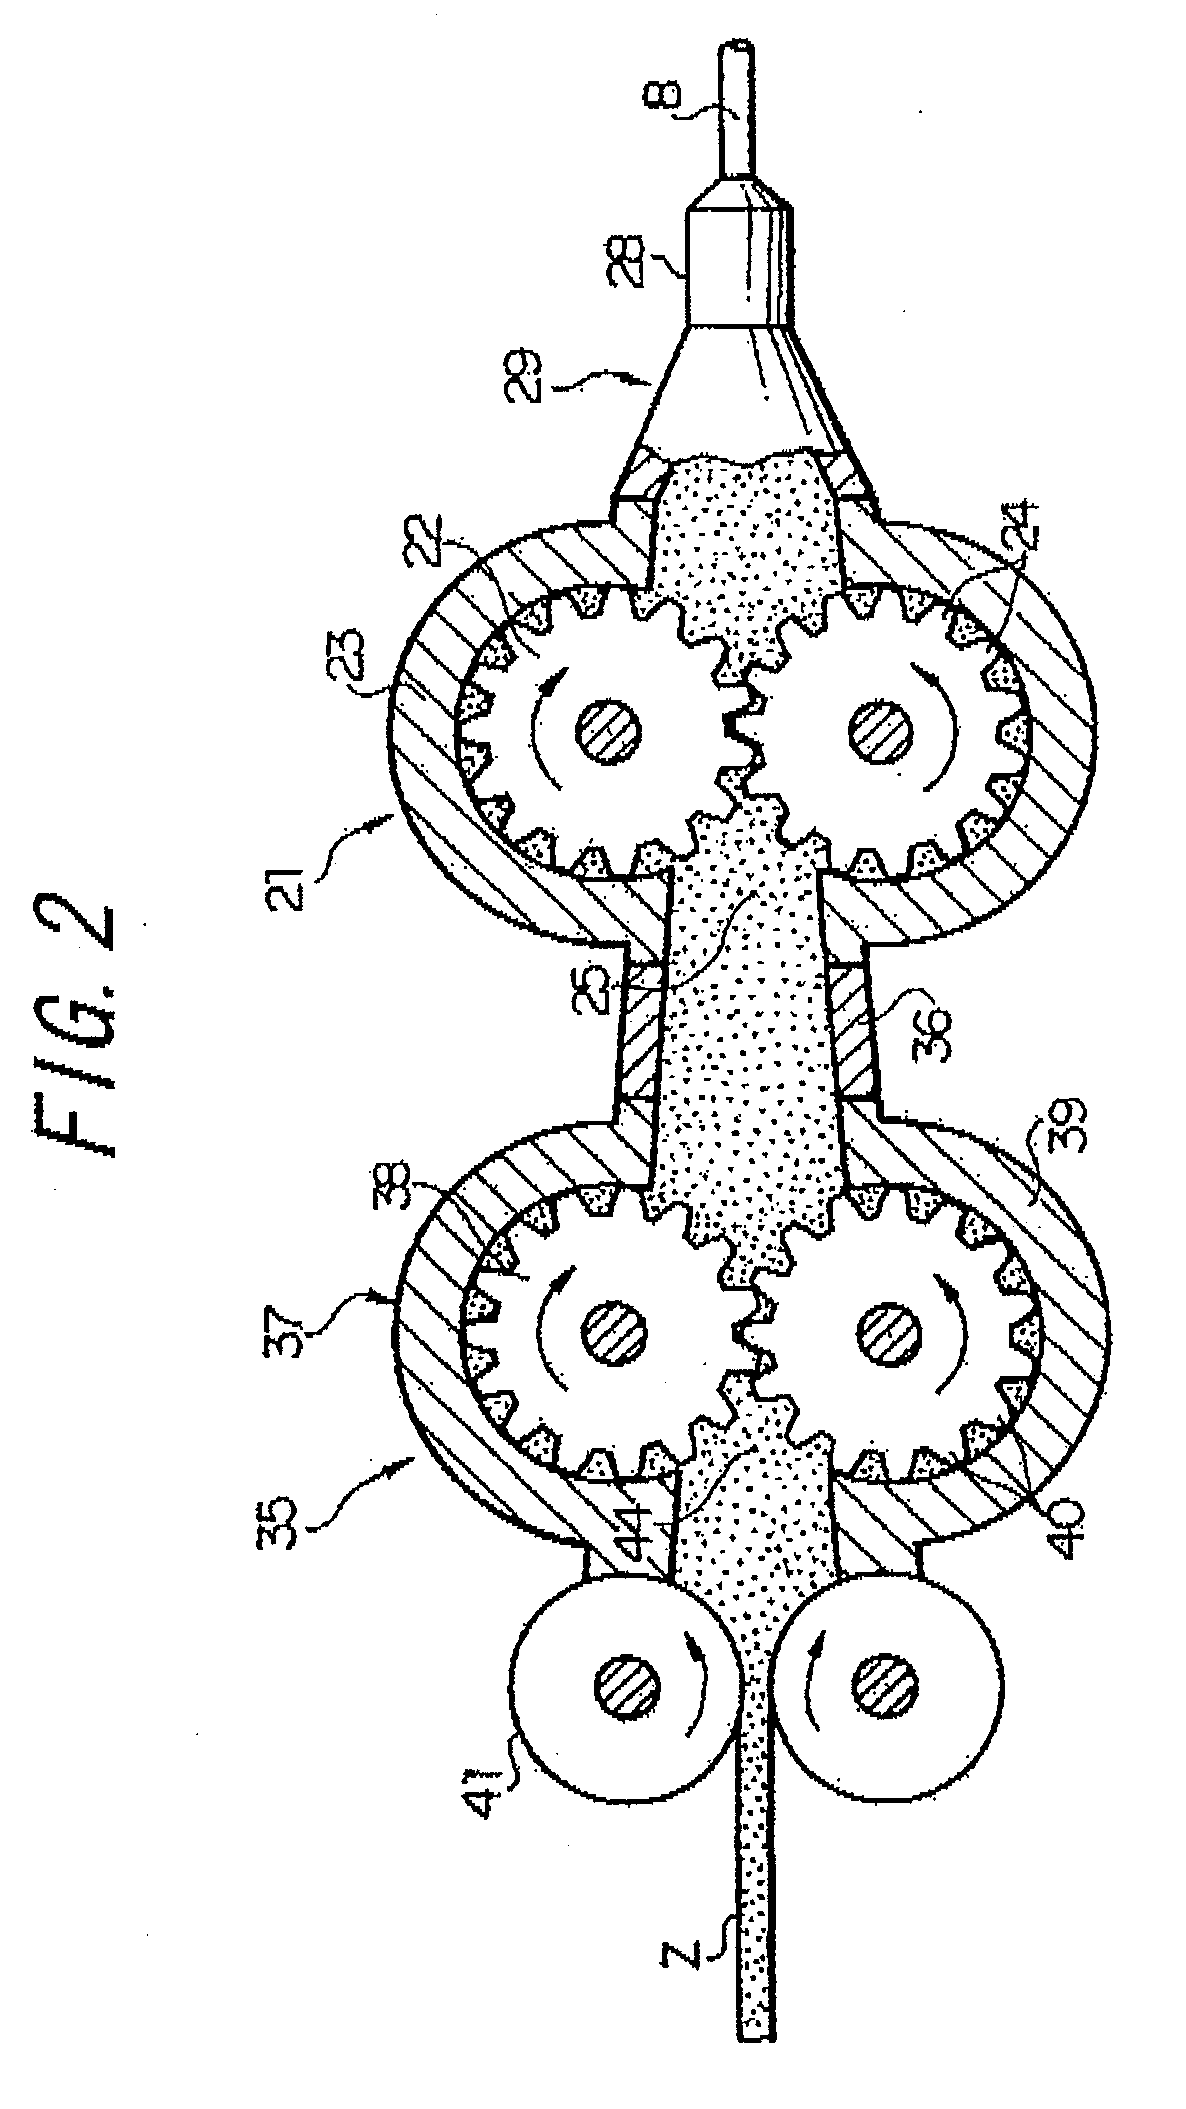 Method and Device For Extruding Strip-Shaped Member